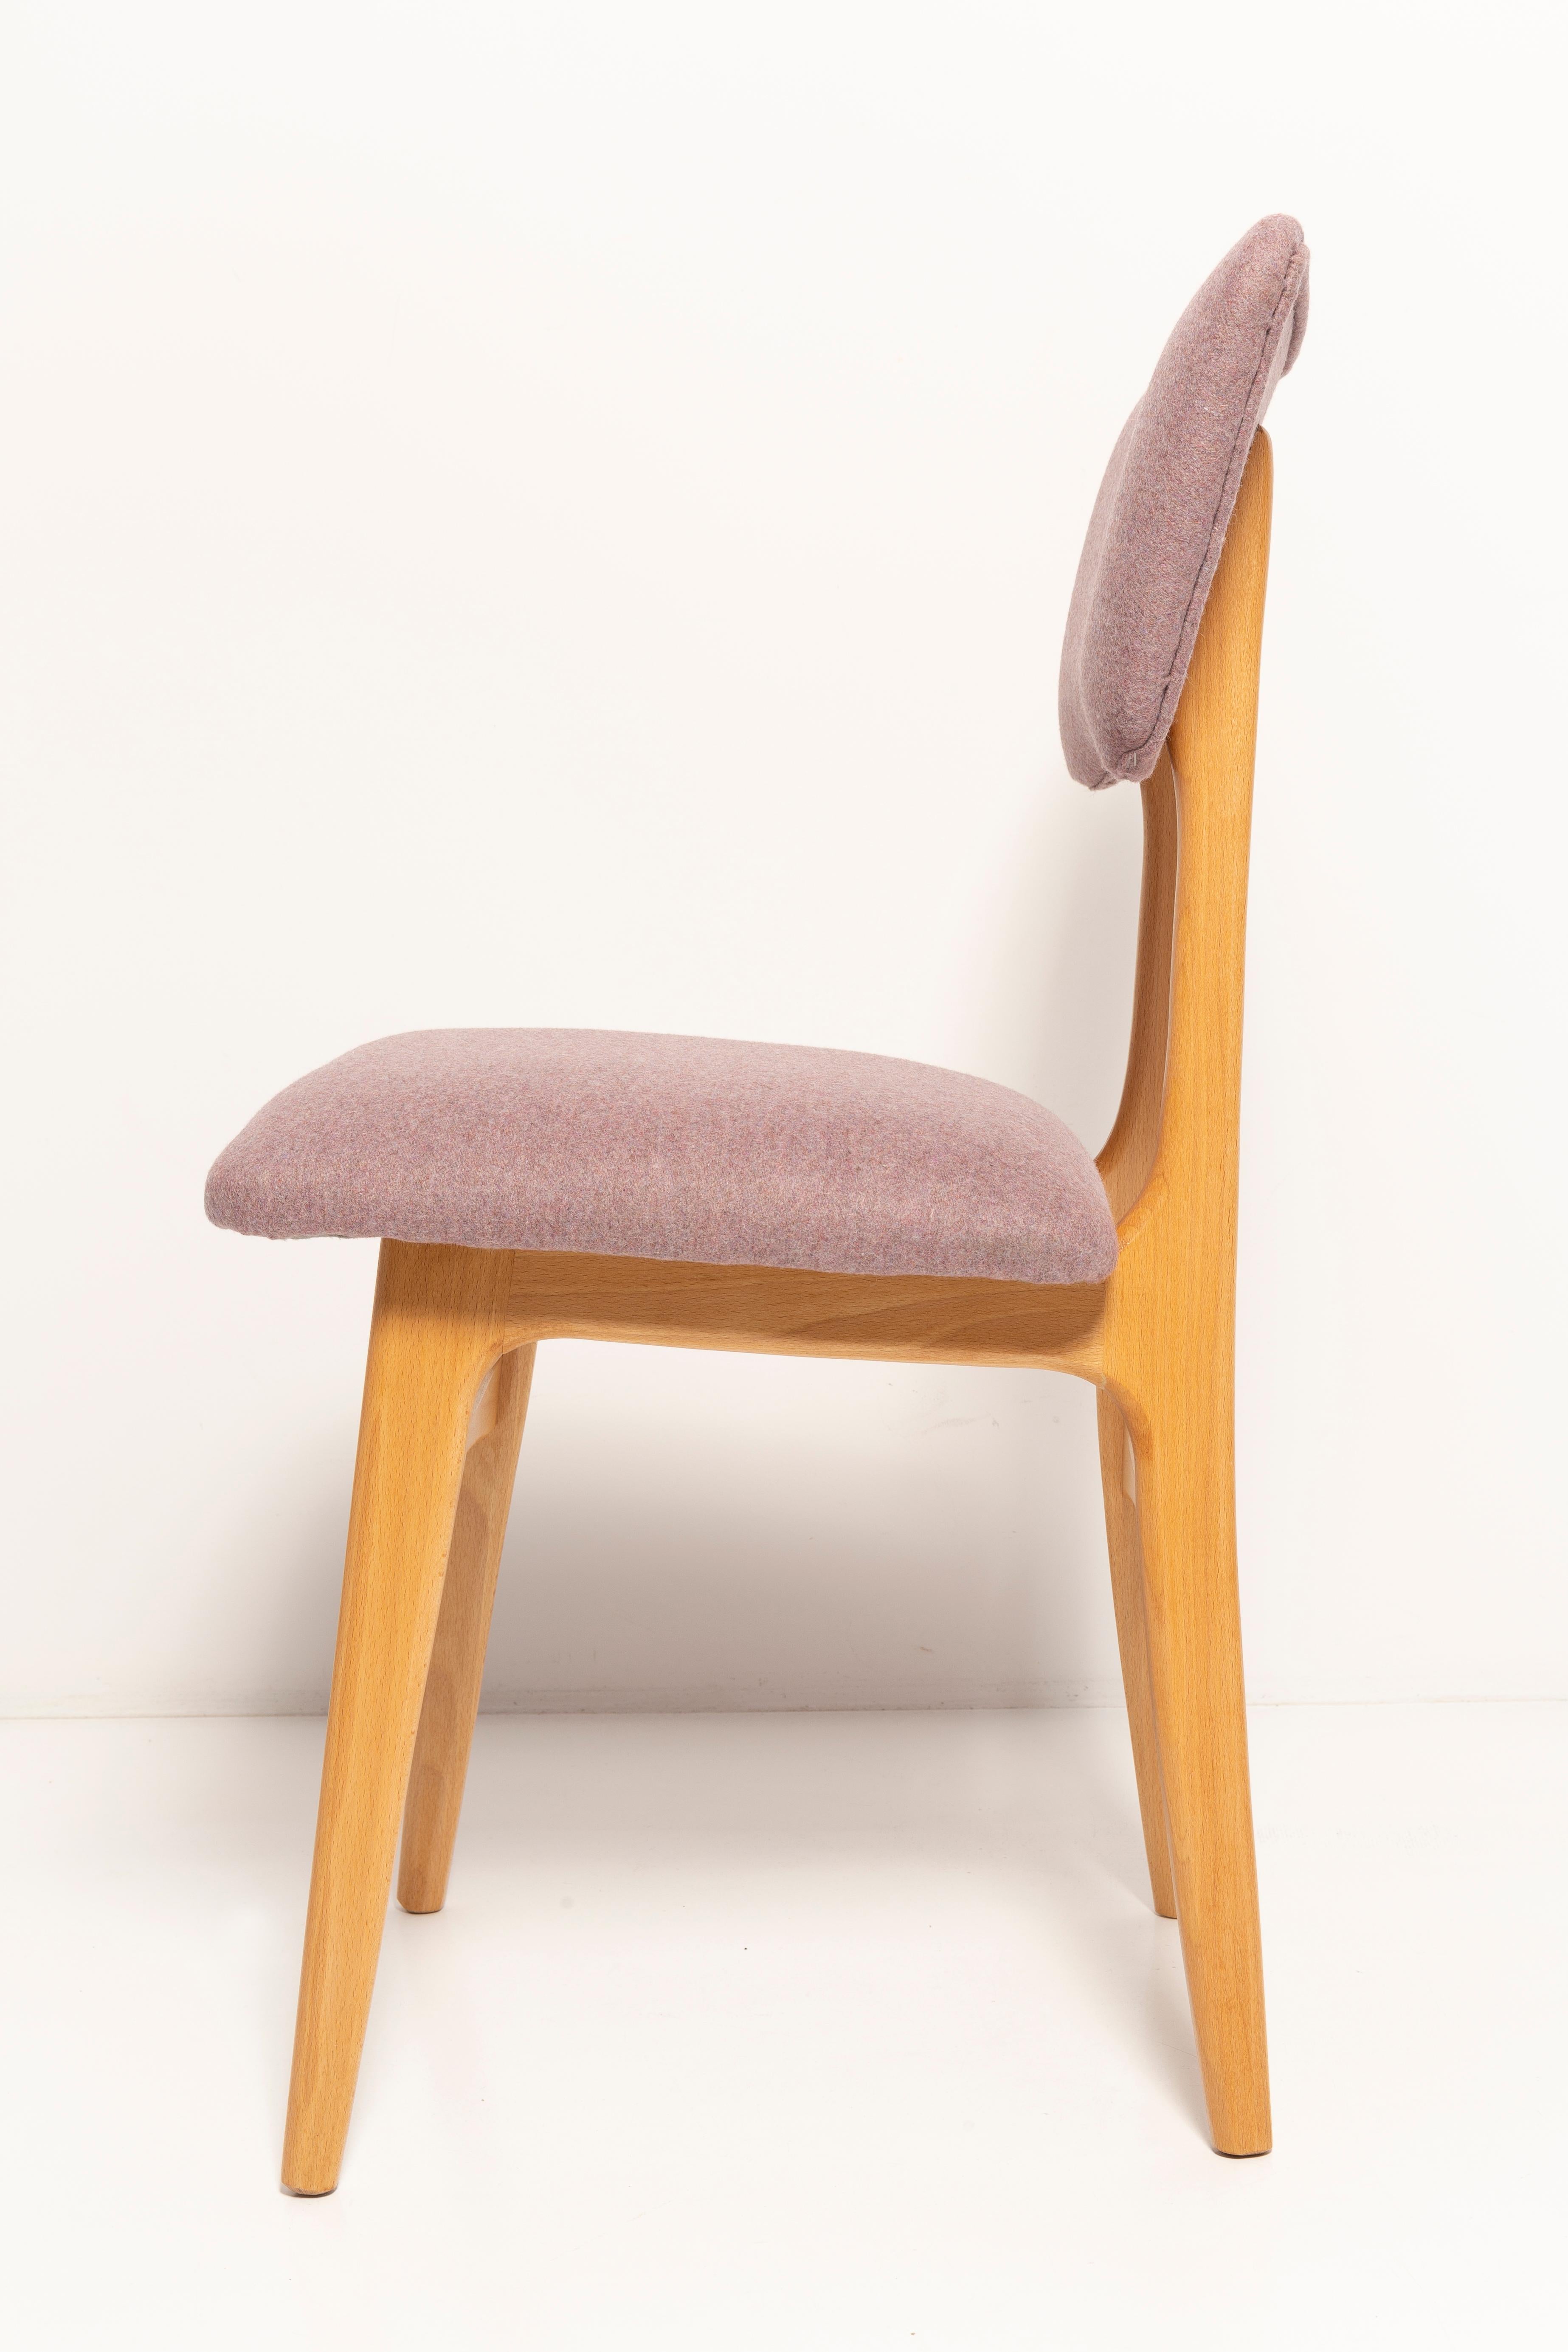 20th Century Butterfly Dining Chair, Pink Wool, Light Wood, Europe, 1960s For Sale 3